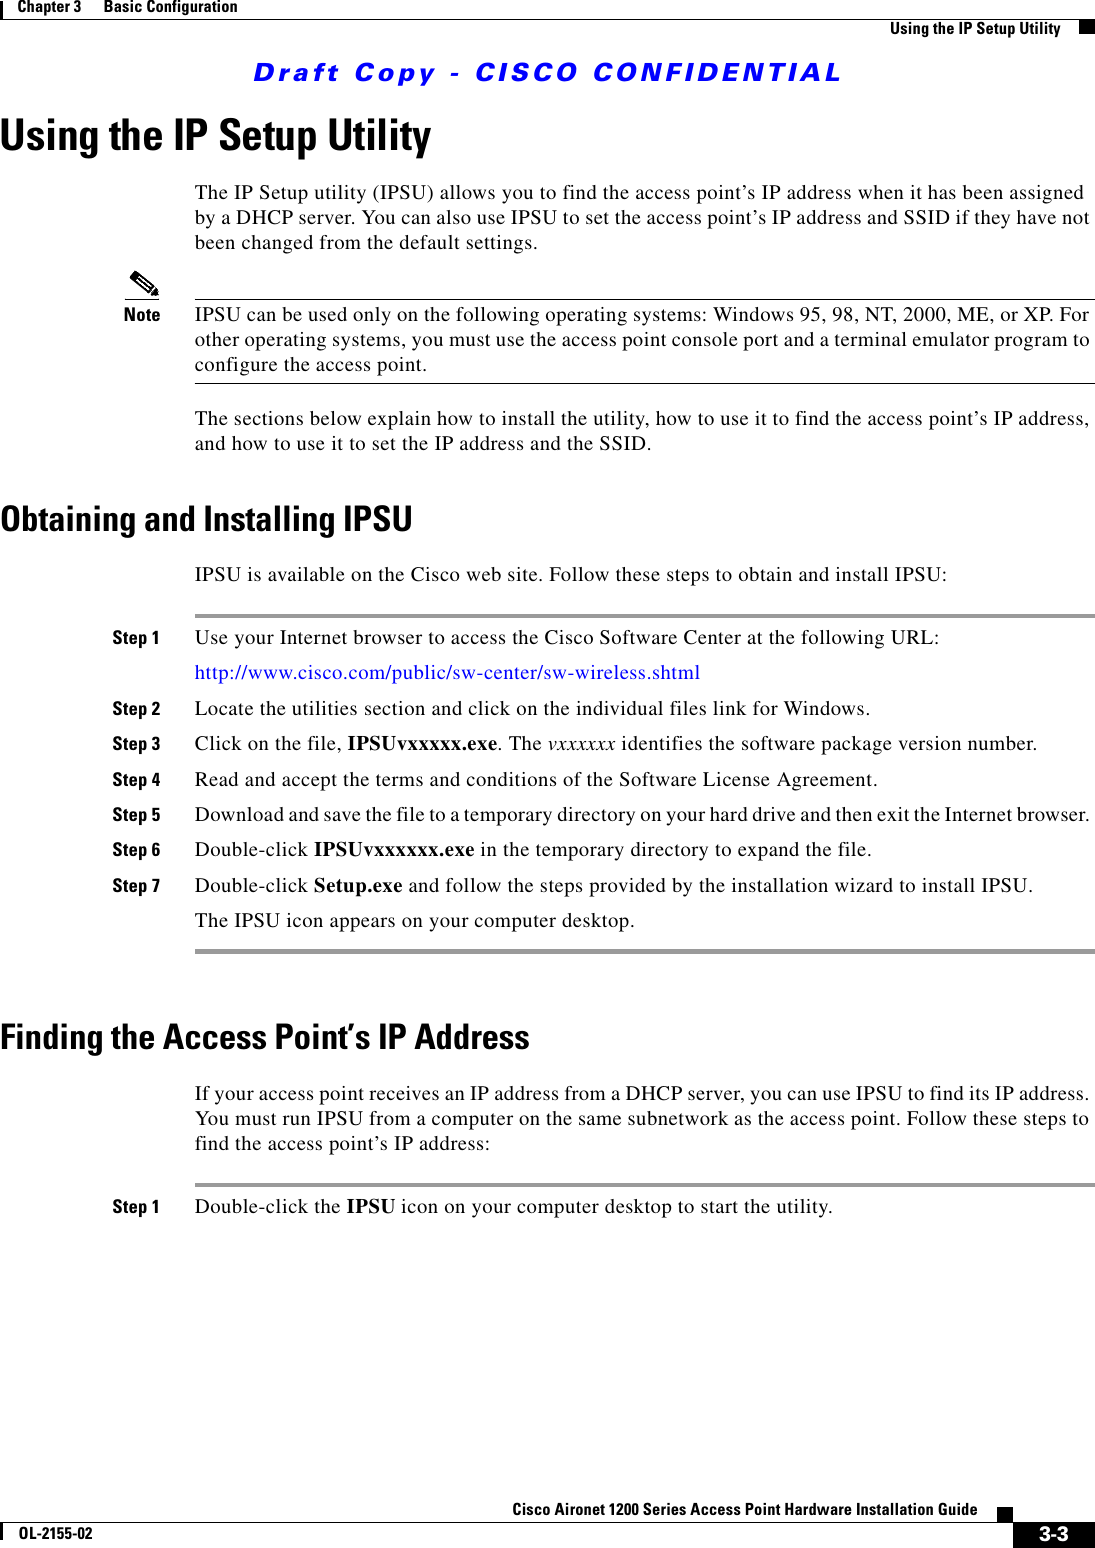 Draft Copy - CISCO CONFIDENTIAL 3-3Cisco Aironet 1200 Series Access Point Hardware Installation GuideOL-2155-02Chapter 3      Basic ConfigurationUsing the IP Setup UtilityUsing the IP Setup UtilityThe IP Setup utility (IPSU) allows you to find the access point’s IP address when it has been assigned by a DHCP server. You can also use IPSU to set the access point’s IP address and SSID if they have not been changed from the default settings.Note IPSU can be used only on the following operating systems: Windows 95, 98, NT, 2000, ME, or XP. For other operating systems, you must use the access point console port and a terminal emulator program to configure the access point.The sections below explain how to install the utility, how to use it to find the access point’s IP address, and how to use it to set the IP address and the SSID.Obtaining and Installing IPSUIPSU is available on the Cisco web site. Follow these steps to obtain and install IPSU:Step 1 Use your Internet browser to access the Cisco Software Center at the following URL:http://www.cisco.com/public/sw-center/sw-wireless.shtmlStep 2 Locate the utilities section and click on the individual files link for Windows.Step 3 Click on the file, IPSUvxxxxx.exe. The vxxxxxx identifies the software package version number.Step 4 Read and accept the terms and conditions of the Software License Agreement.Step 5 Download and save the file to a temporary directory on your hard drive and then exit the Internet browser. Step 6 Double-click IPSUvxxxxxx.exe in the temporary directory to expand the file.Step 7 Double-click Setup.exe and follow the steps provided by the installation wizard to install IPSU.The IPSU icon appears on your computer desktop.Finding the Access Point’s IP AddressIf your access point receives an IP address from a DHCP server, you can use IPSU to find its IP address. You must run IPSU from a computer on the same subnetwork as the access point. Follow these steps to find the access point’s IP address:Step 1 Double-click the IPSU icon on your computer desktop to start the utility. 